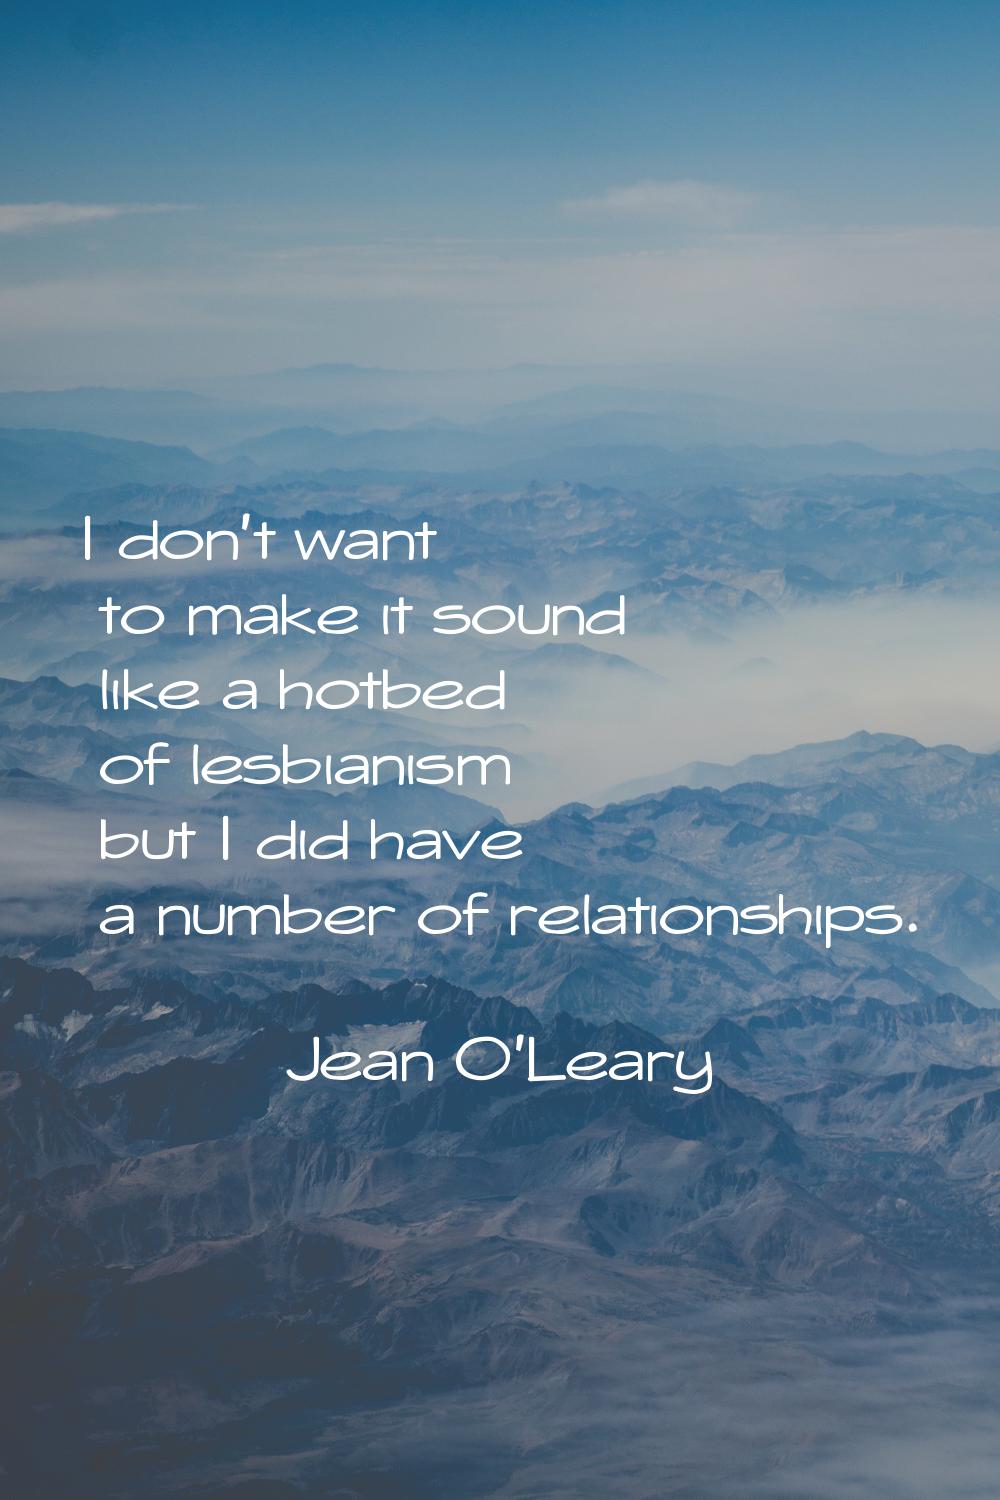 I don't want to make it sound like a hotbed of lesbianism but I did have a number of relationships.